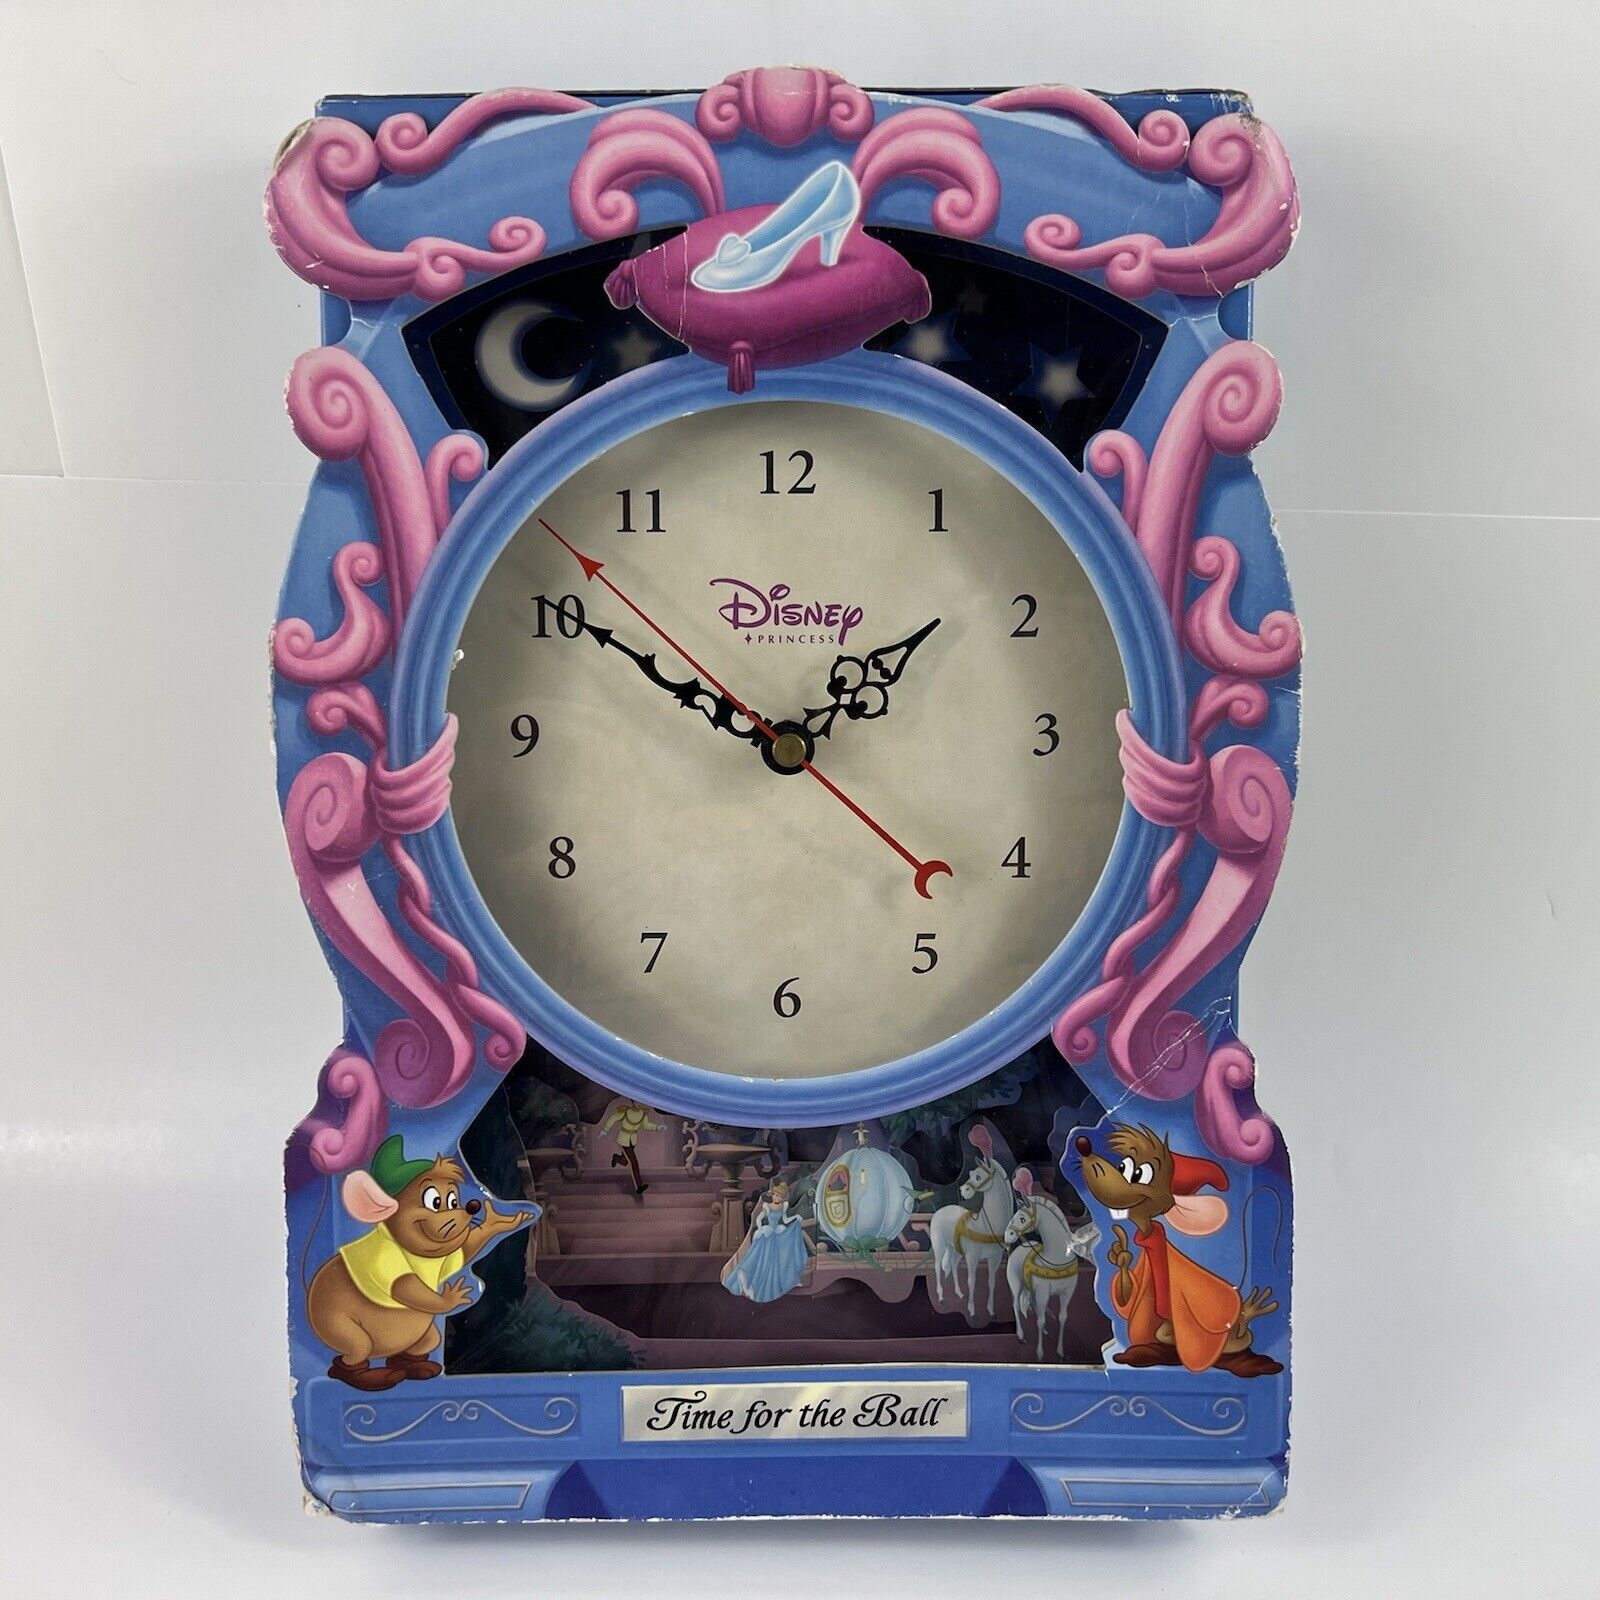 Disney Cinderella Story Book & Clock Time For The Ball Double Sided